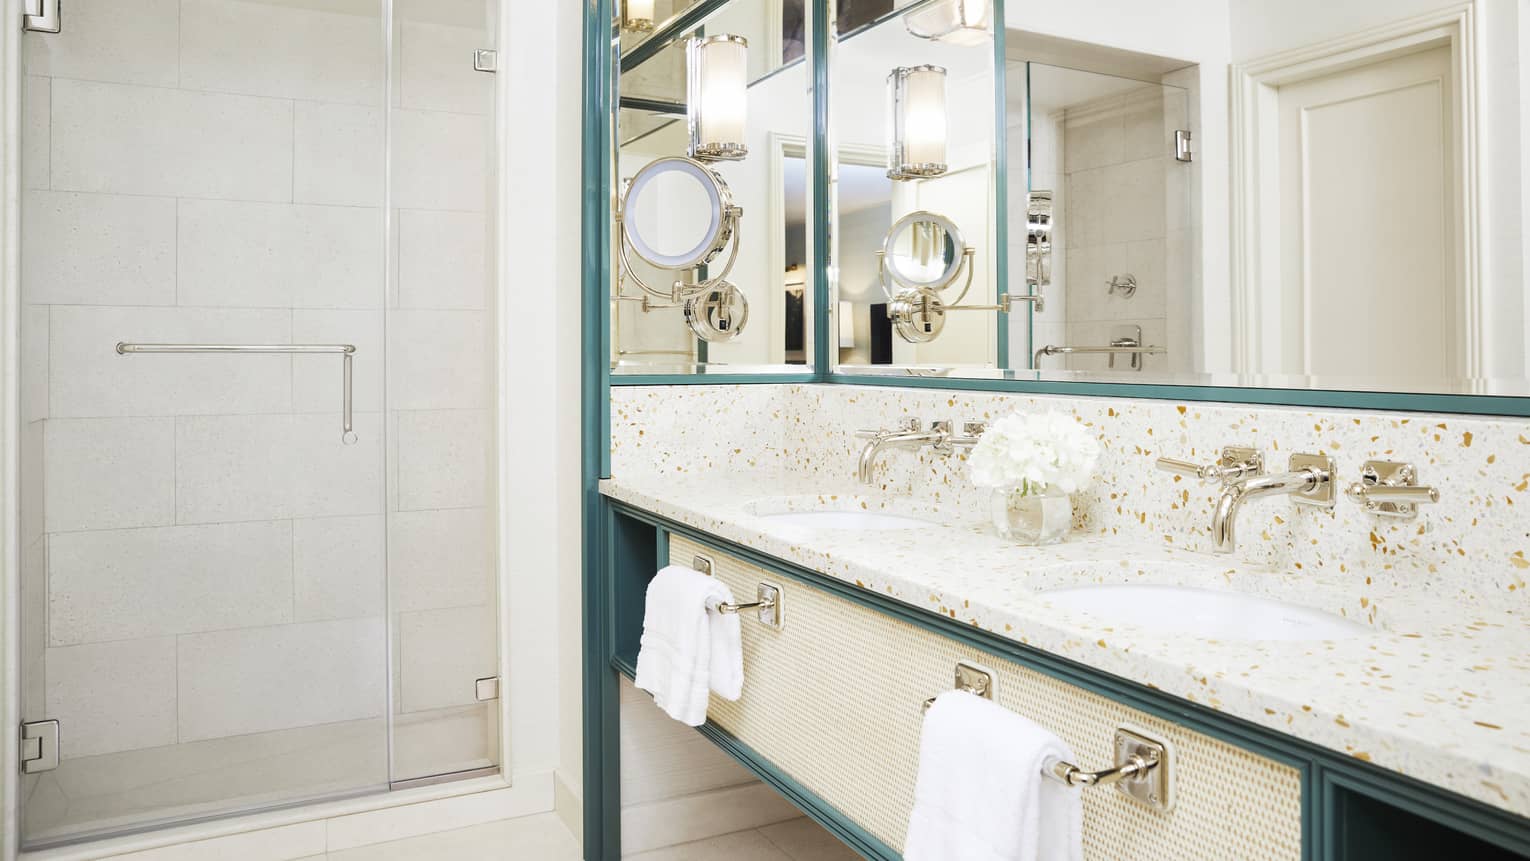 A bright bathroom has metal accents and marble countertops